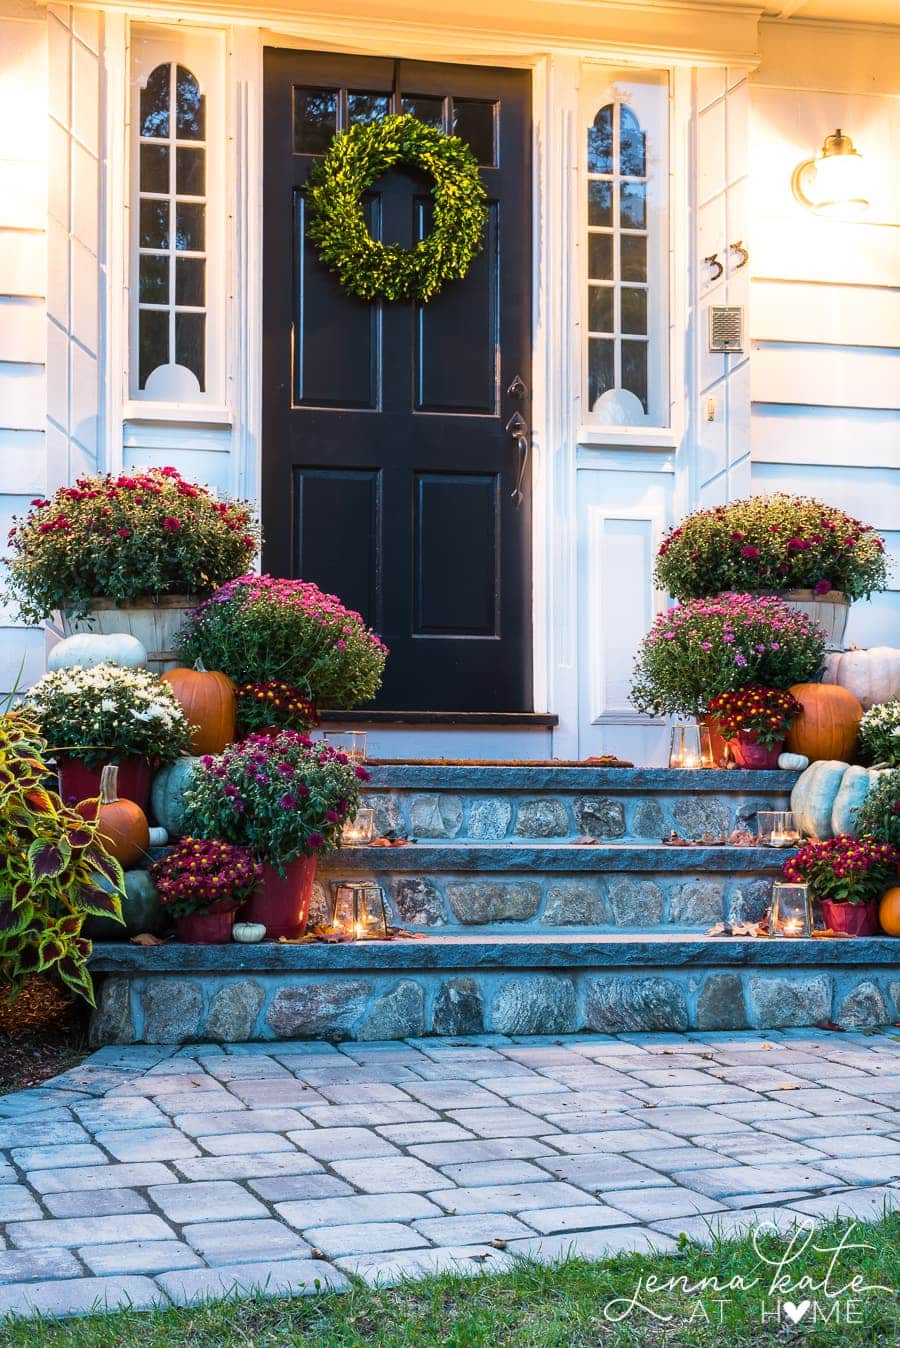 Cute fall porch idea using inexpensive mums, pumpkins and dollar tree buckets as planters